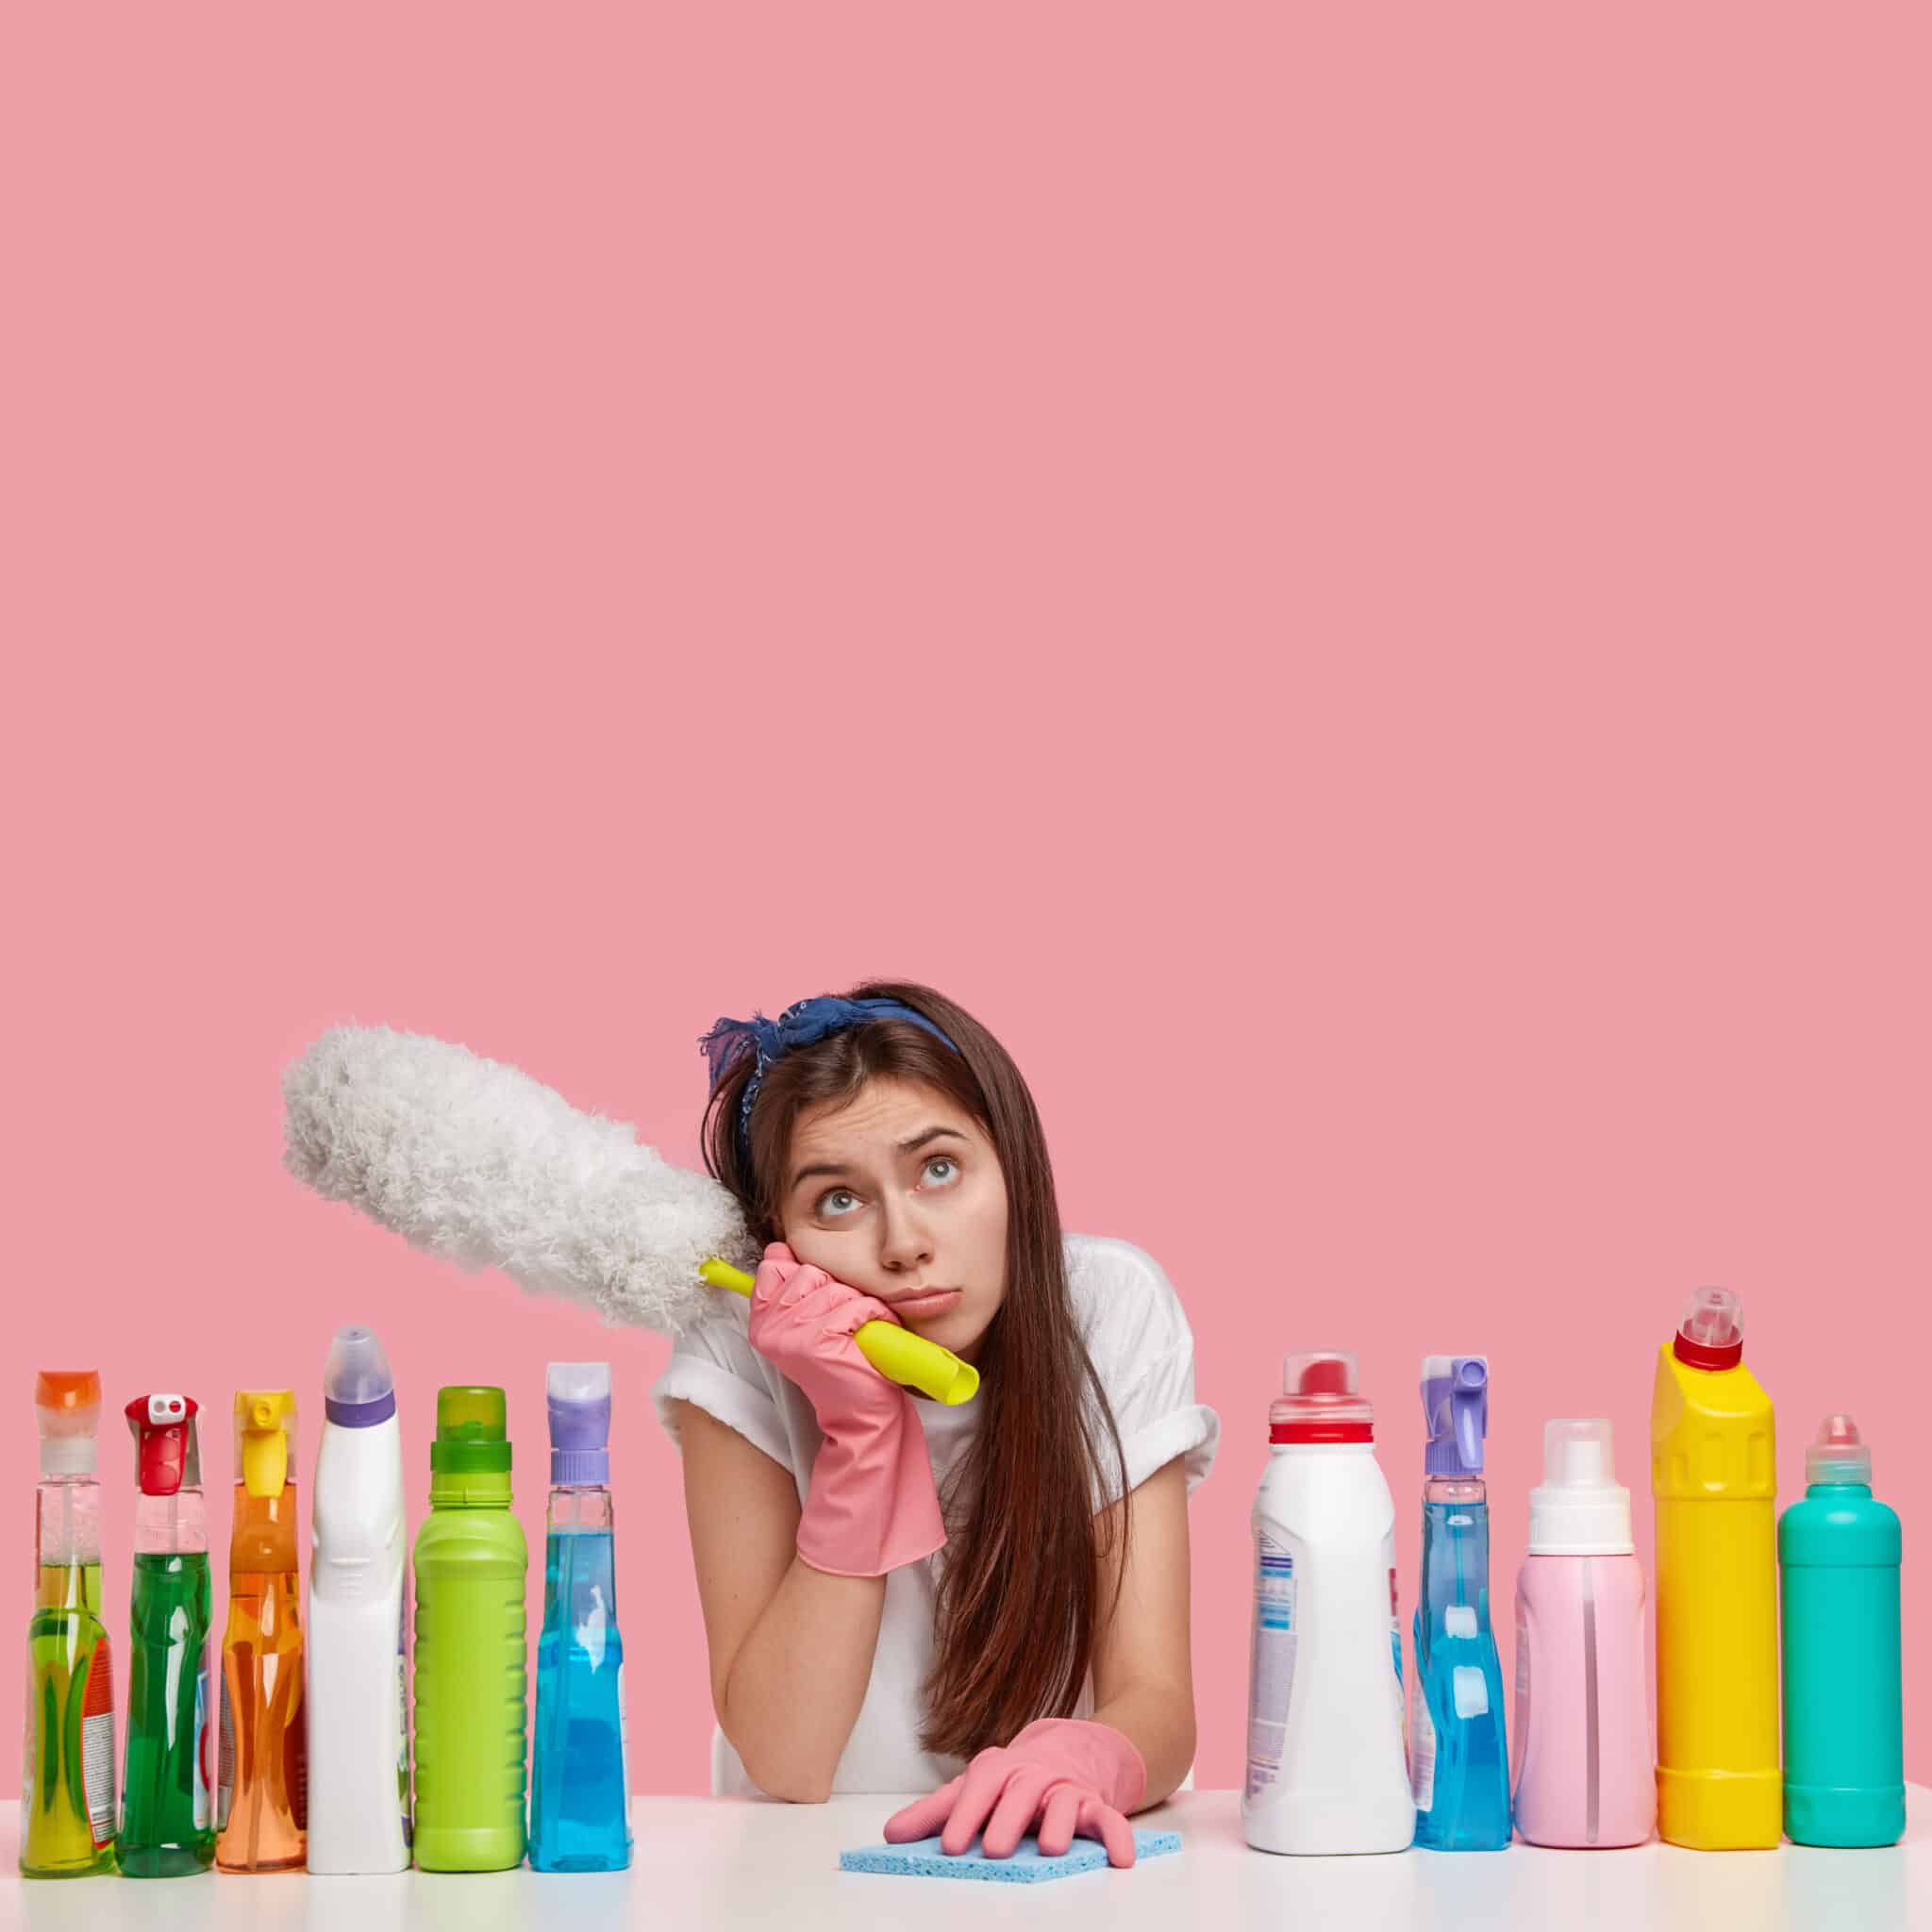 chore ideas for teenagers